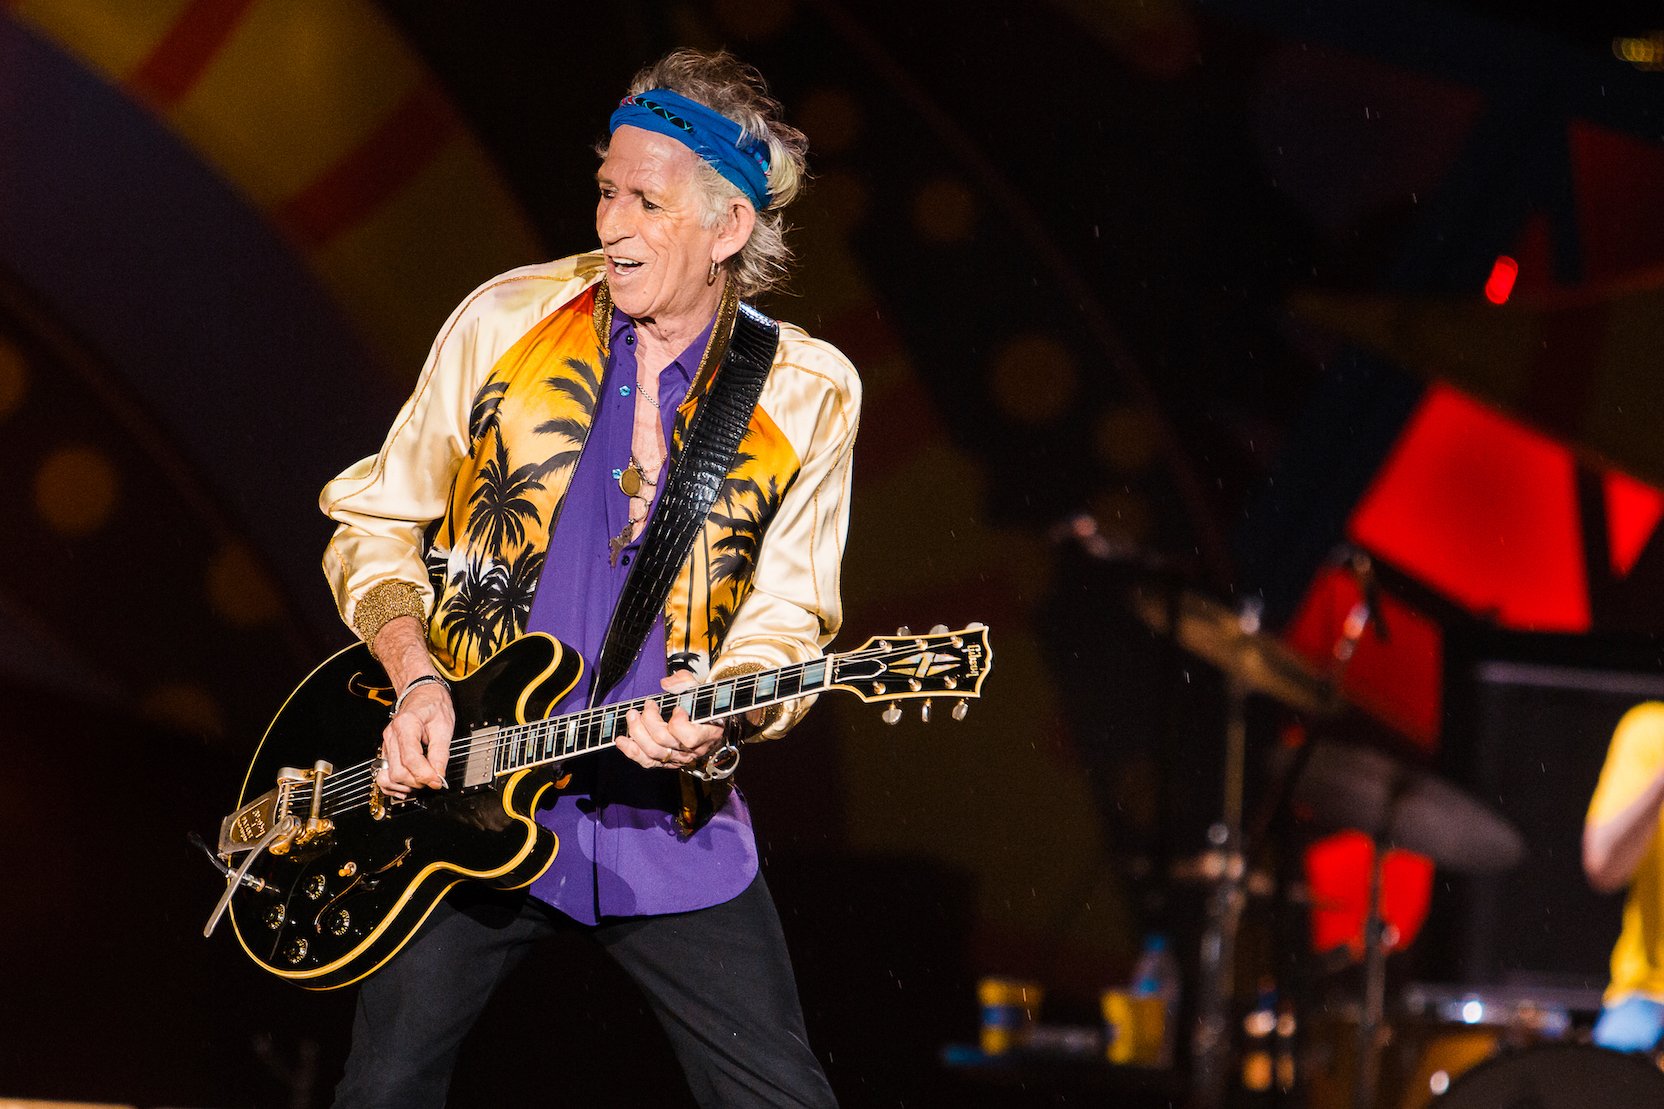 Keith Richards performs with The Rolling Stones in Sao Paulo, Brazil